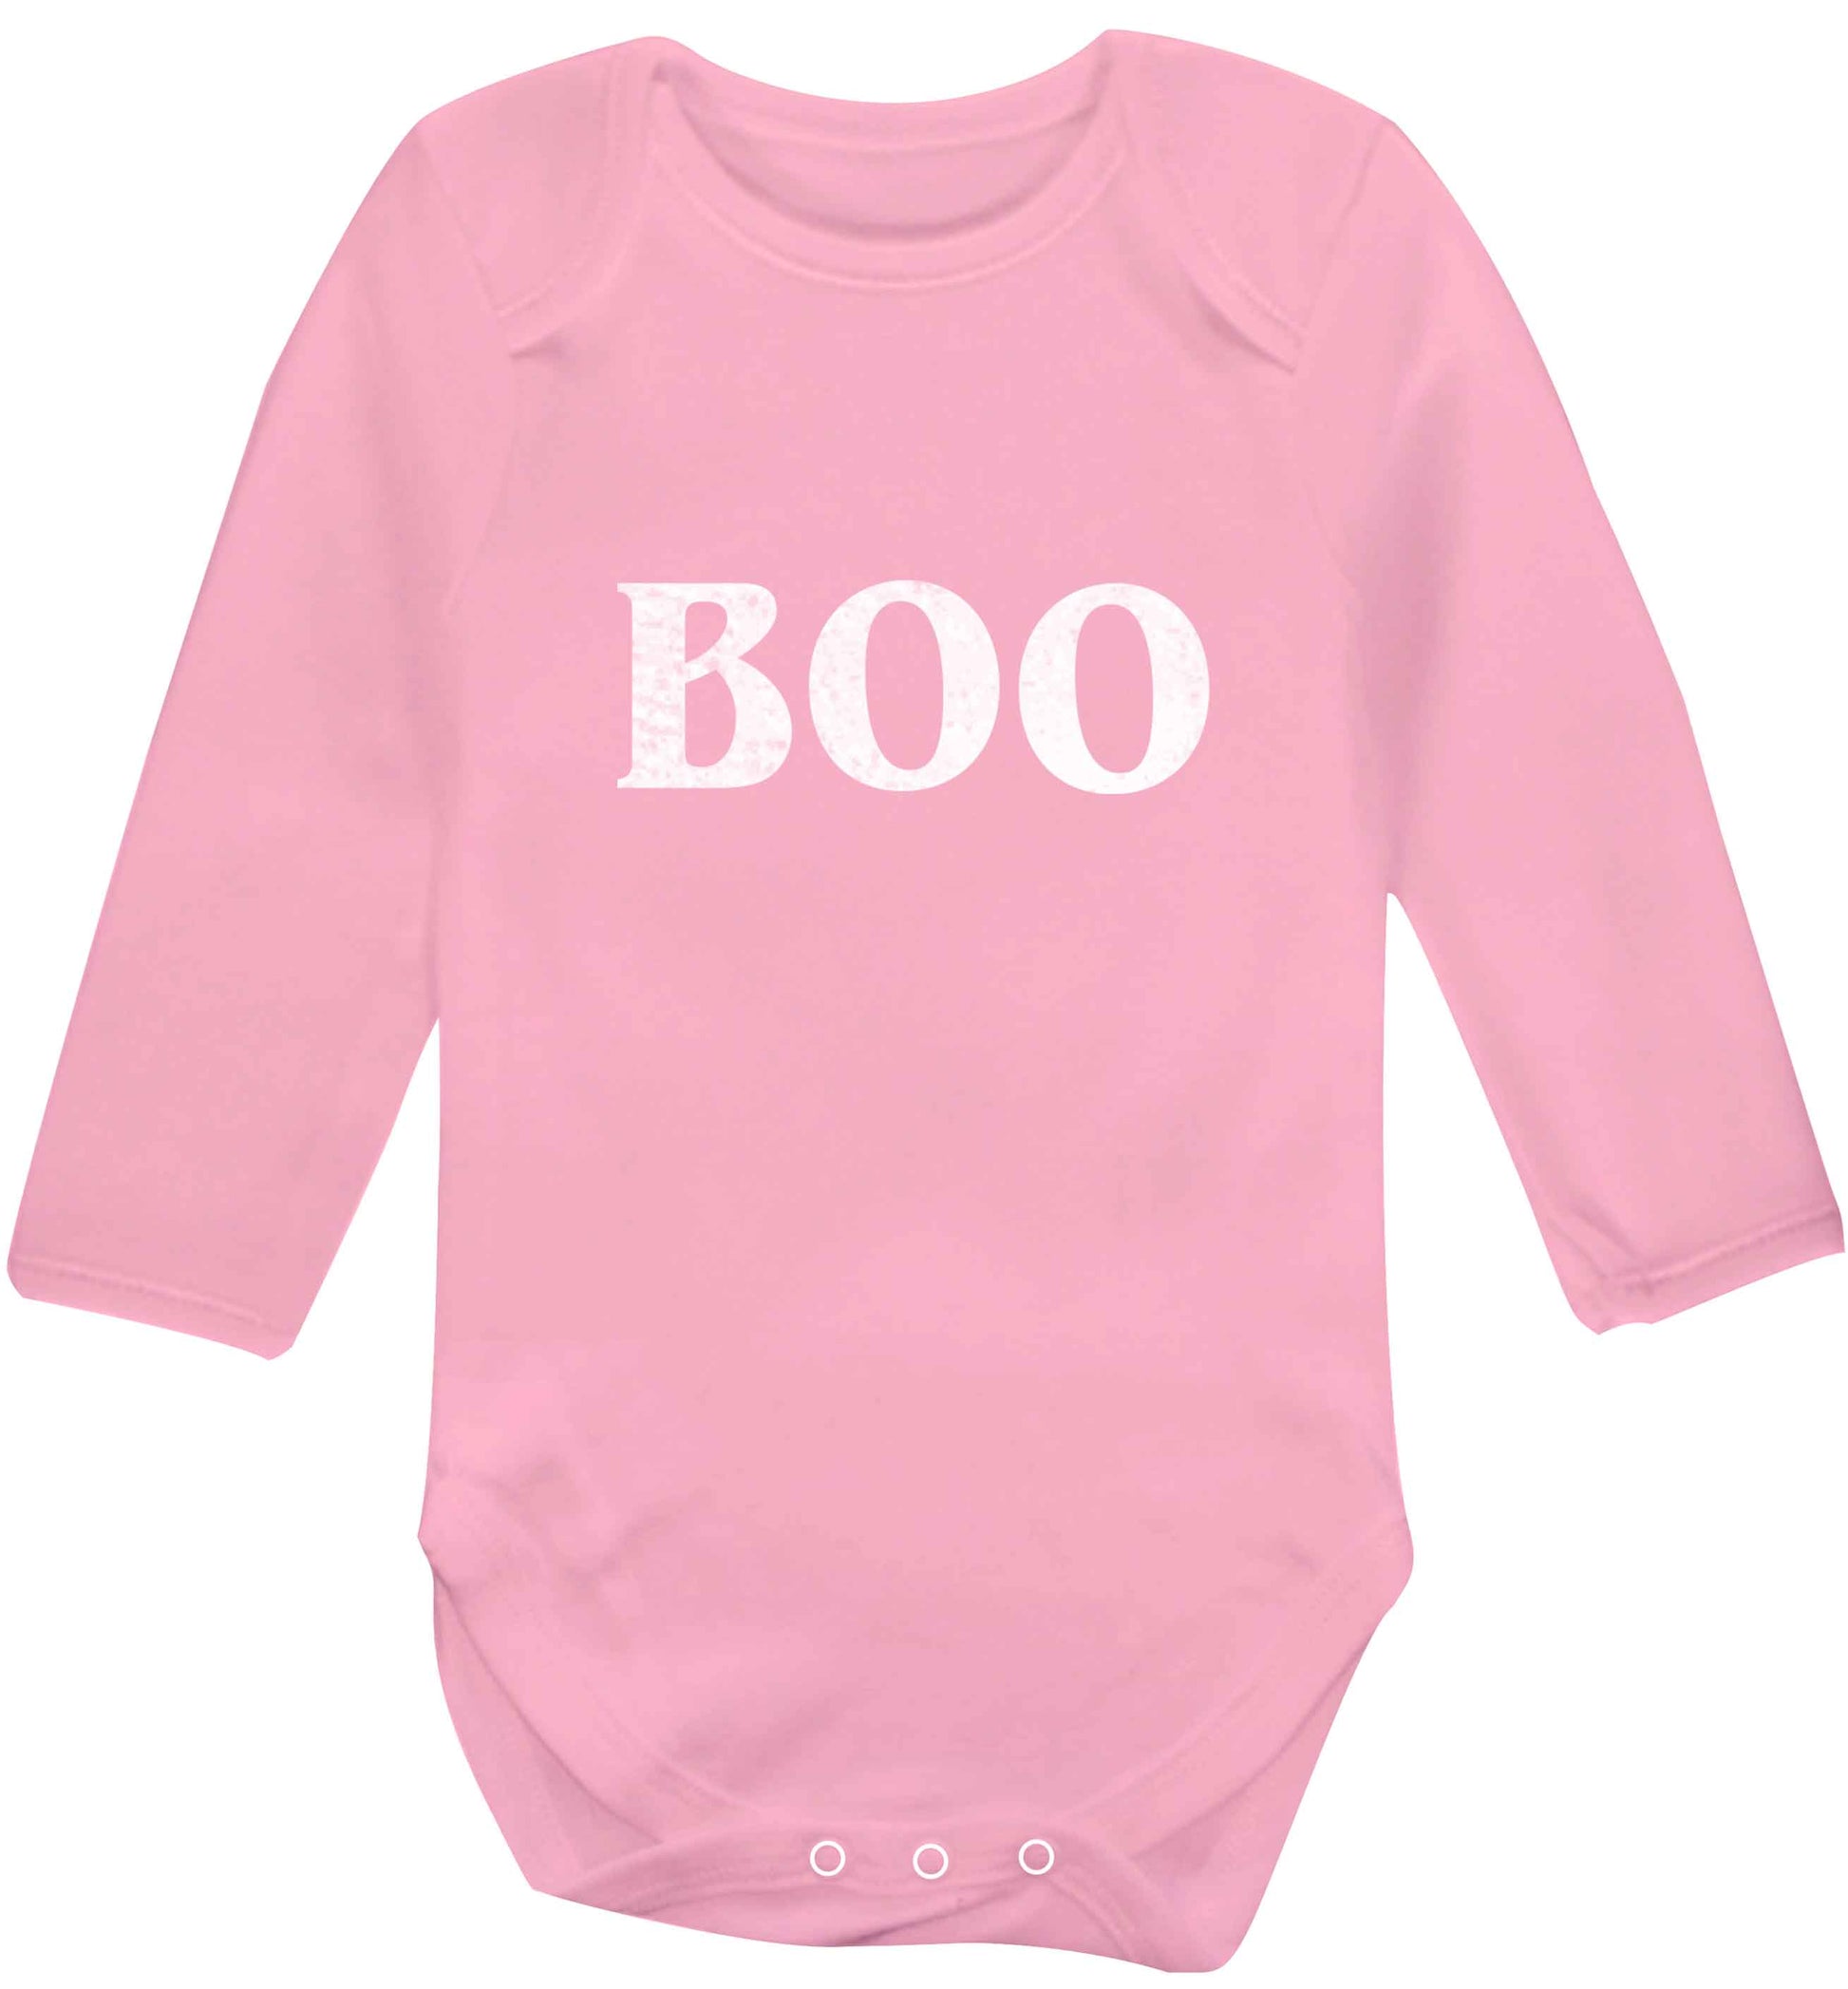 Boo baby vest long sleeved pale pink 6-12 months